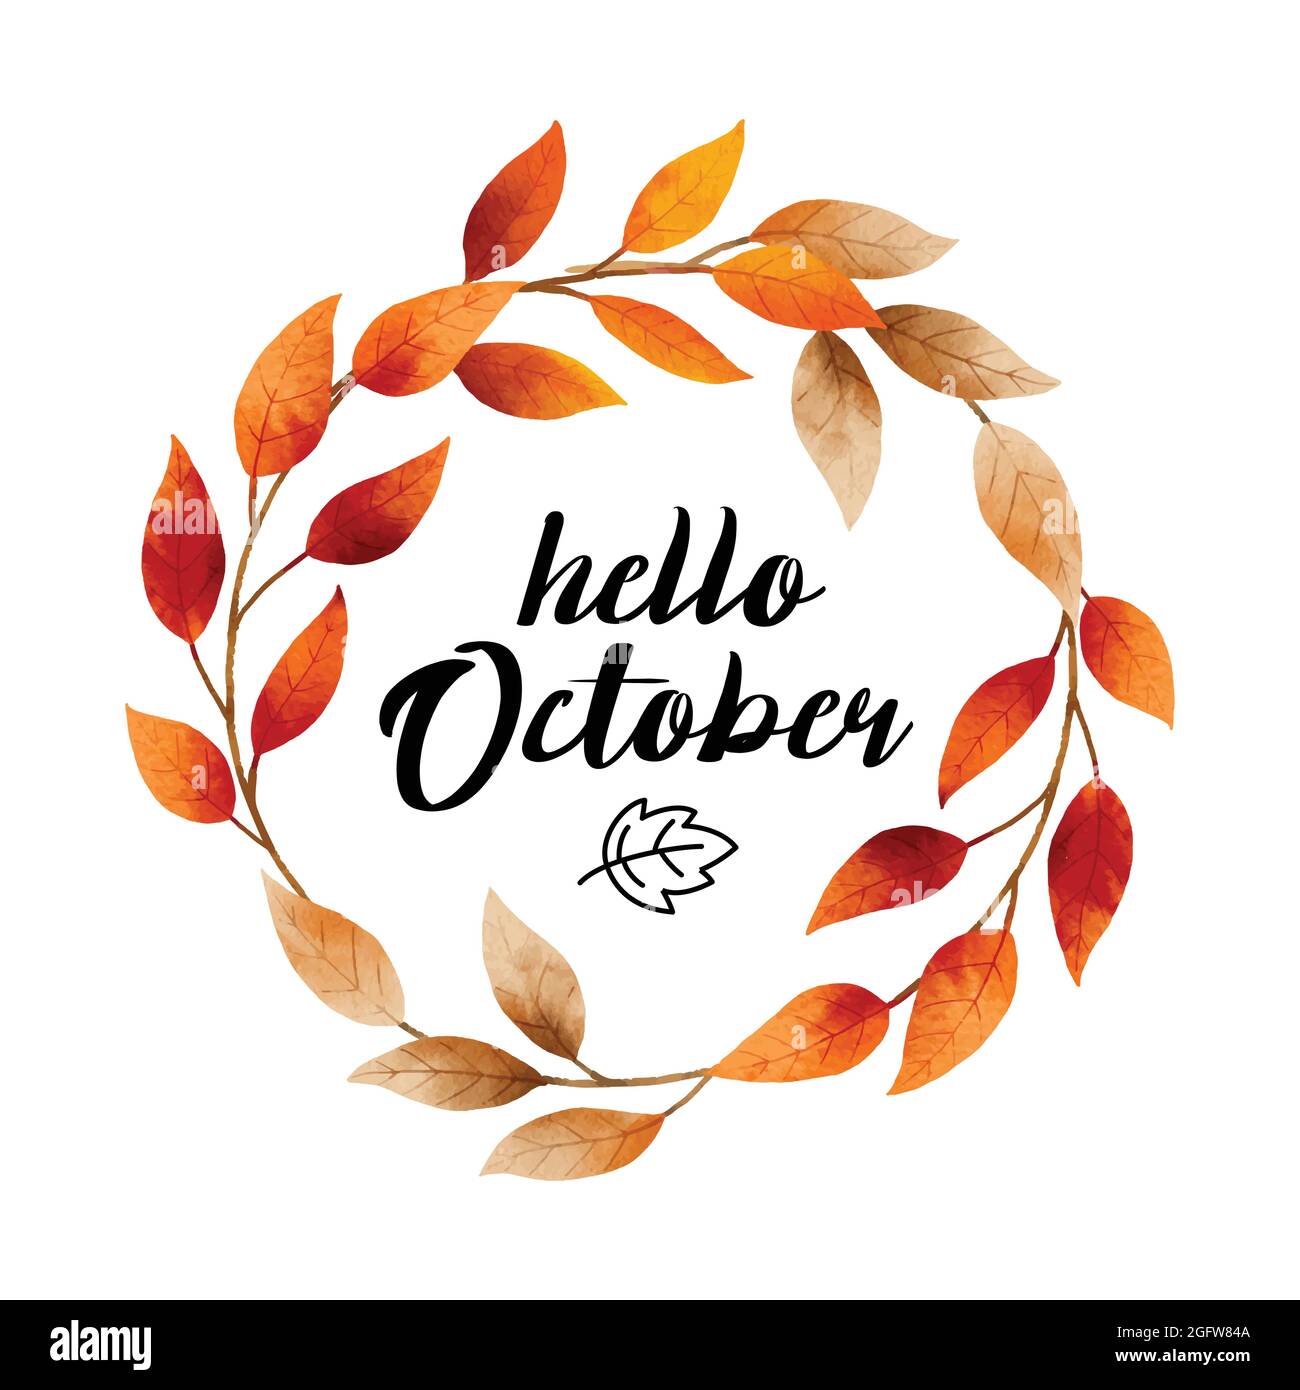 Hello October Lettering Background Stock Vector Illustration Of  Calligraphy, Color: 159940820